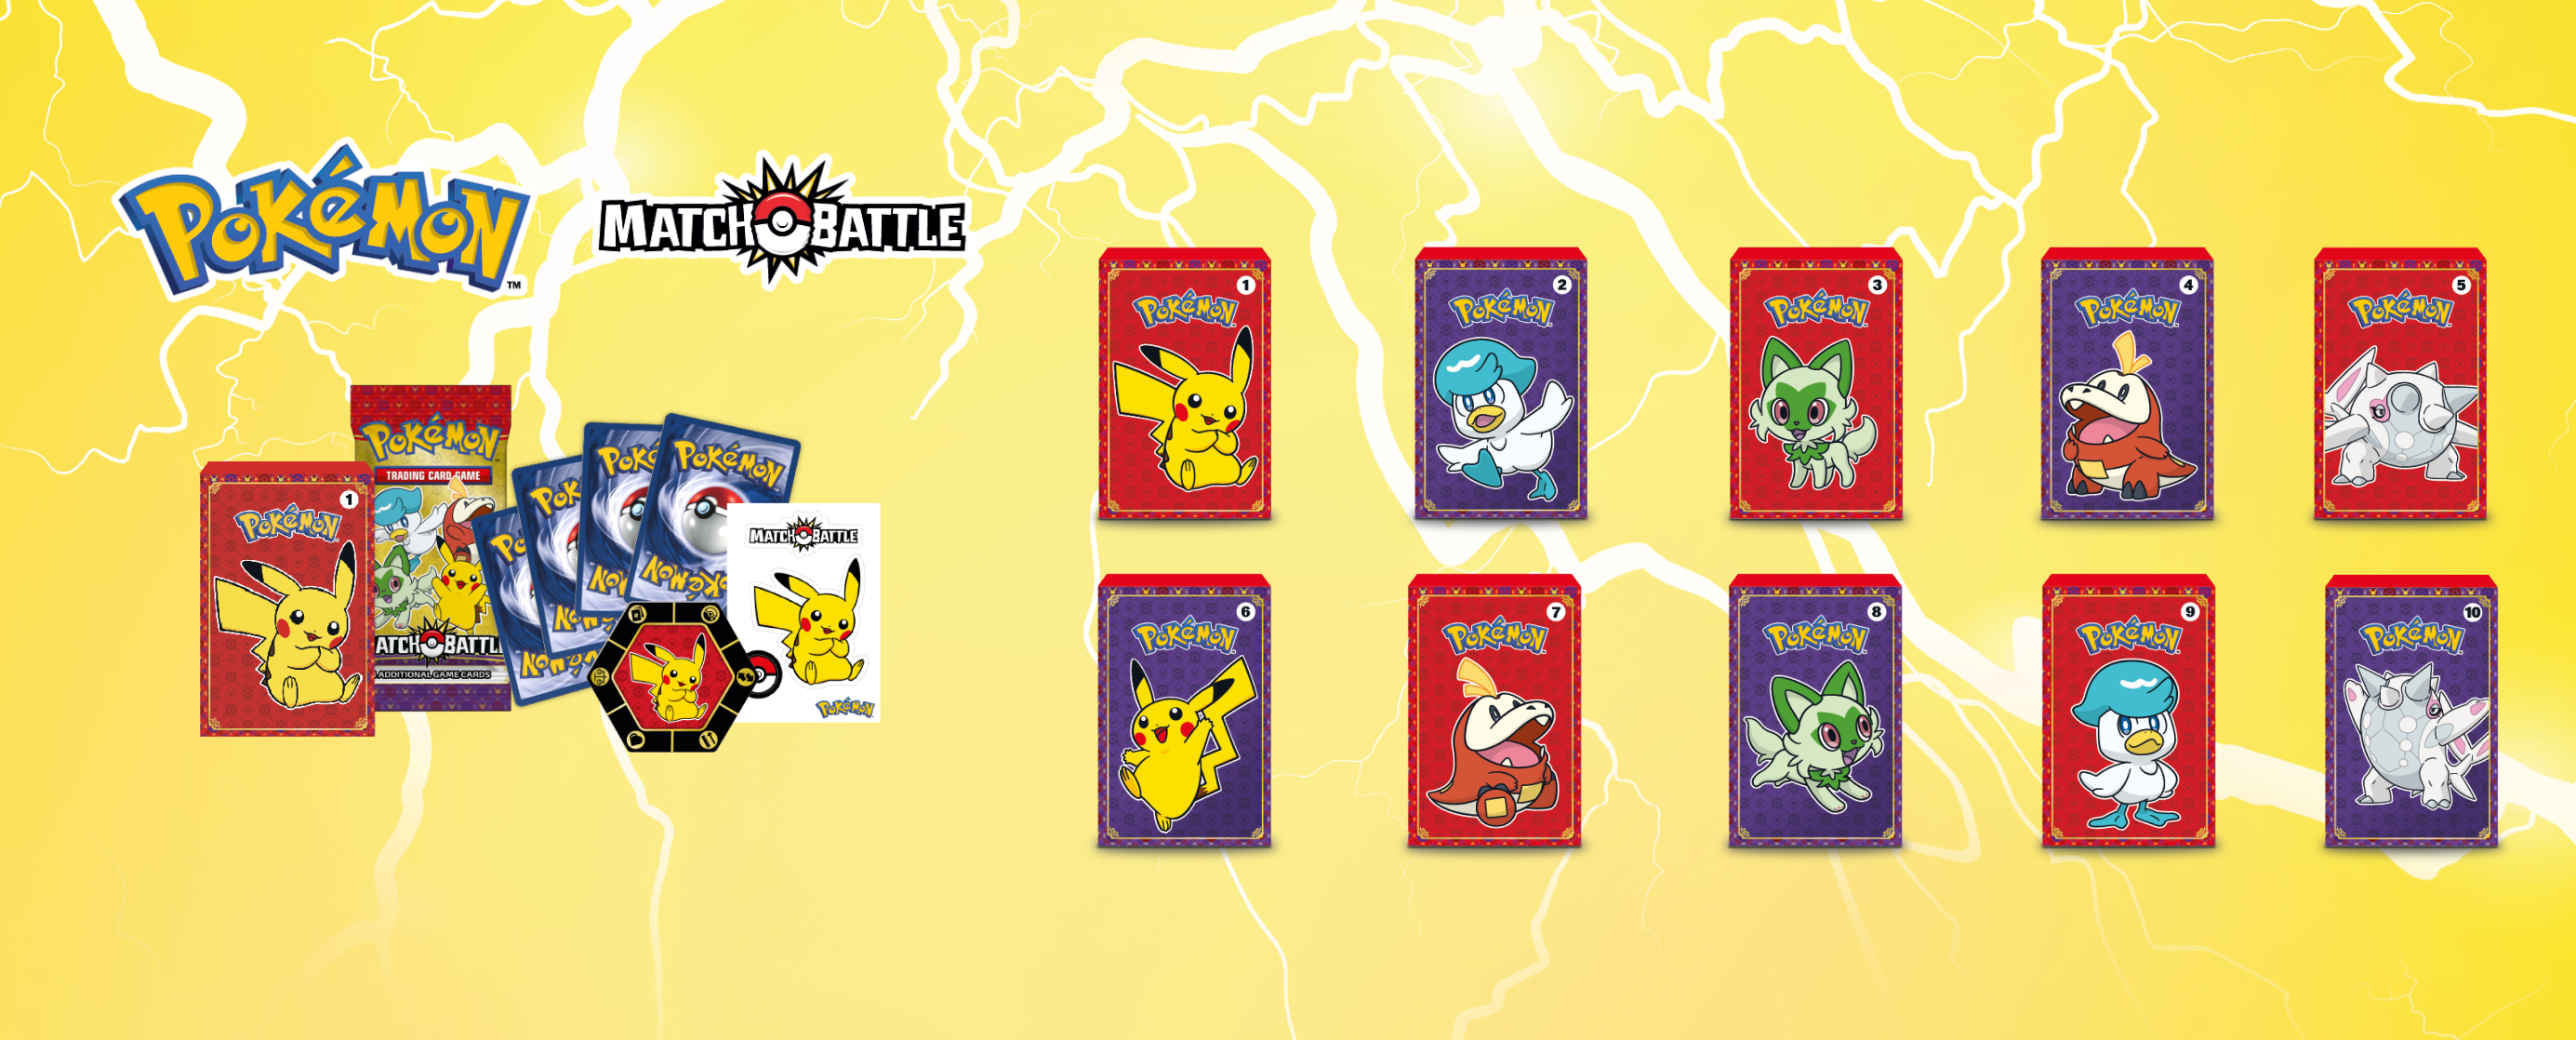 McDonalds Is Bringing Back The Pokémon Happy Meal For A Limited Time